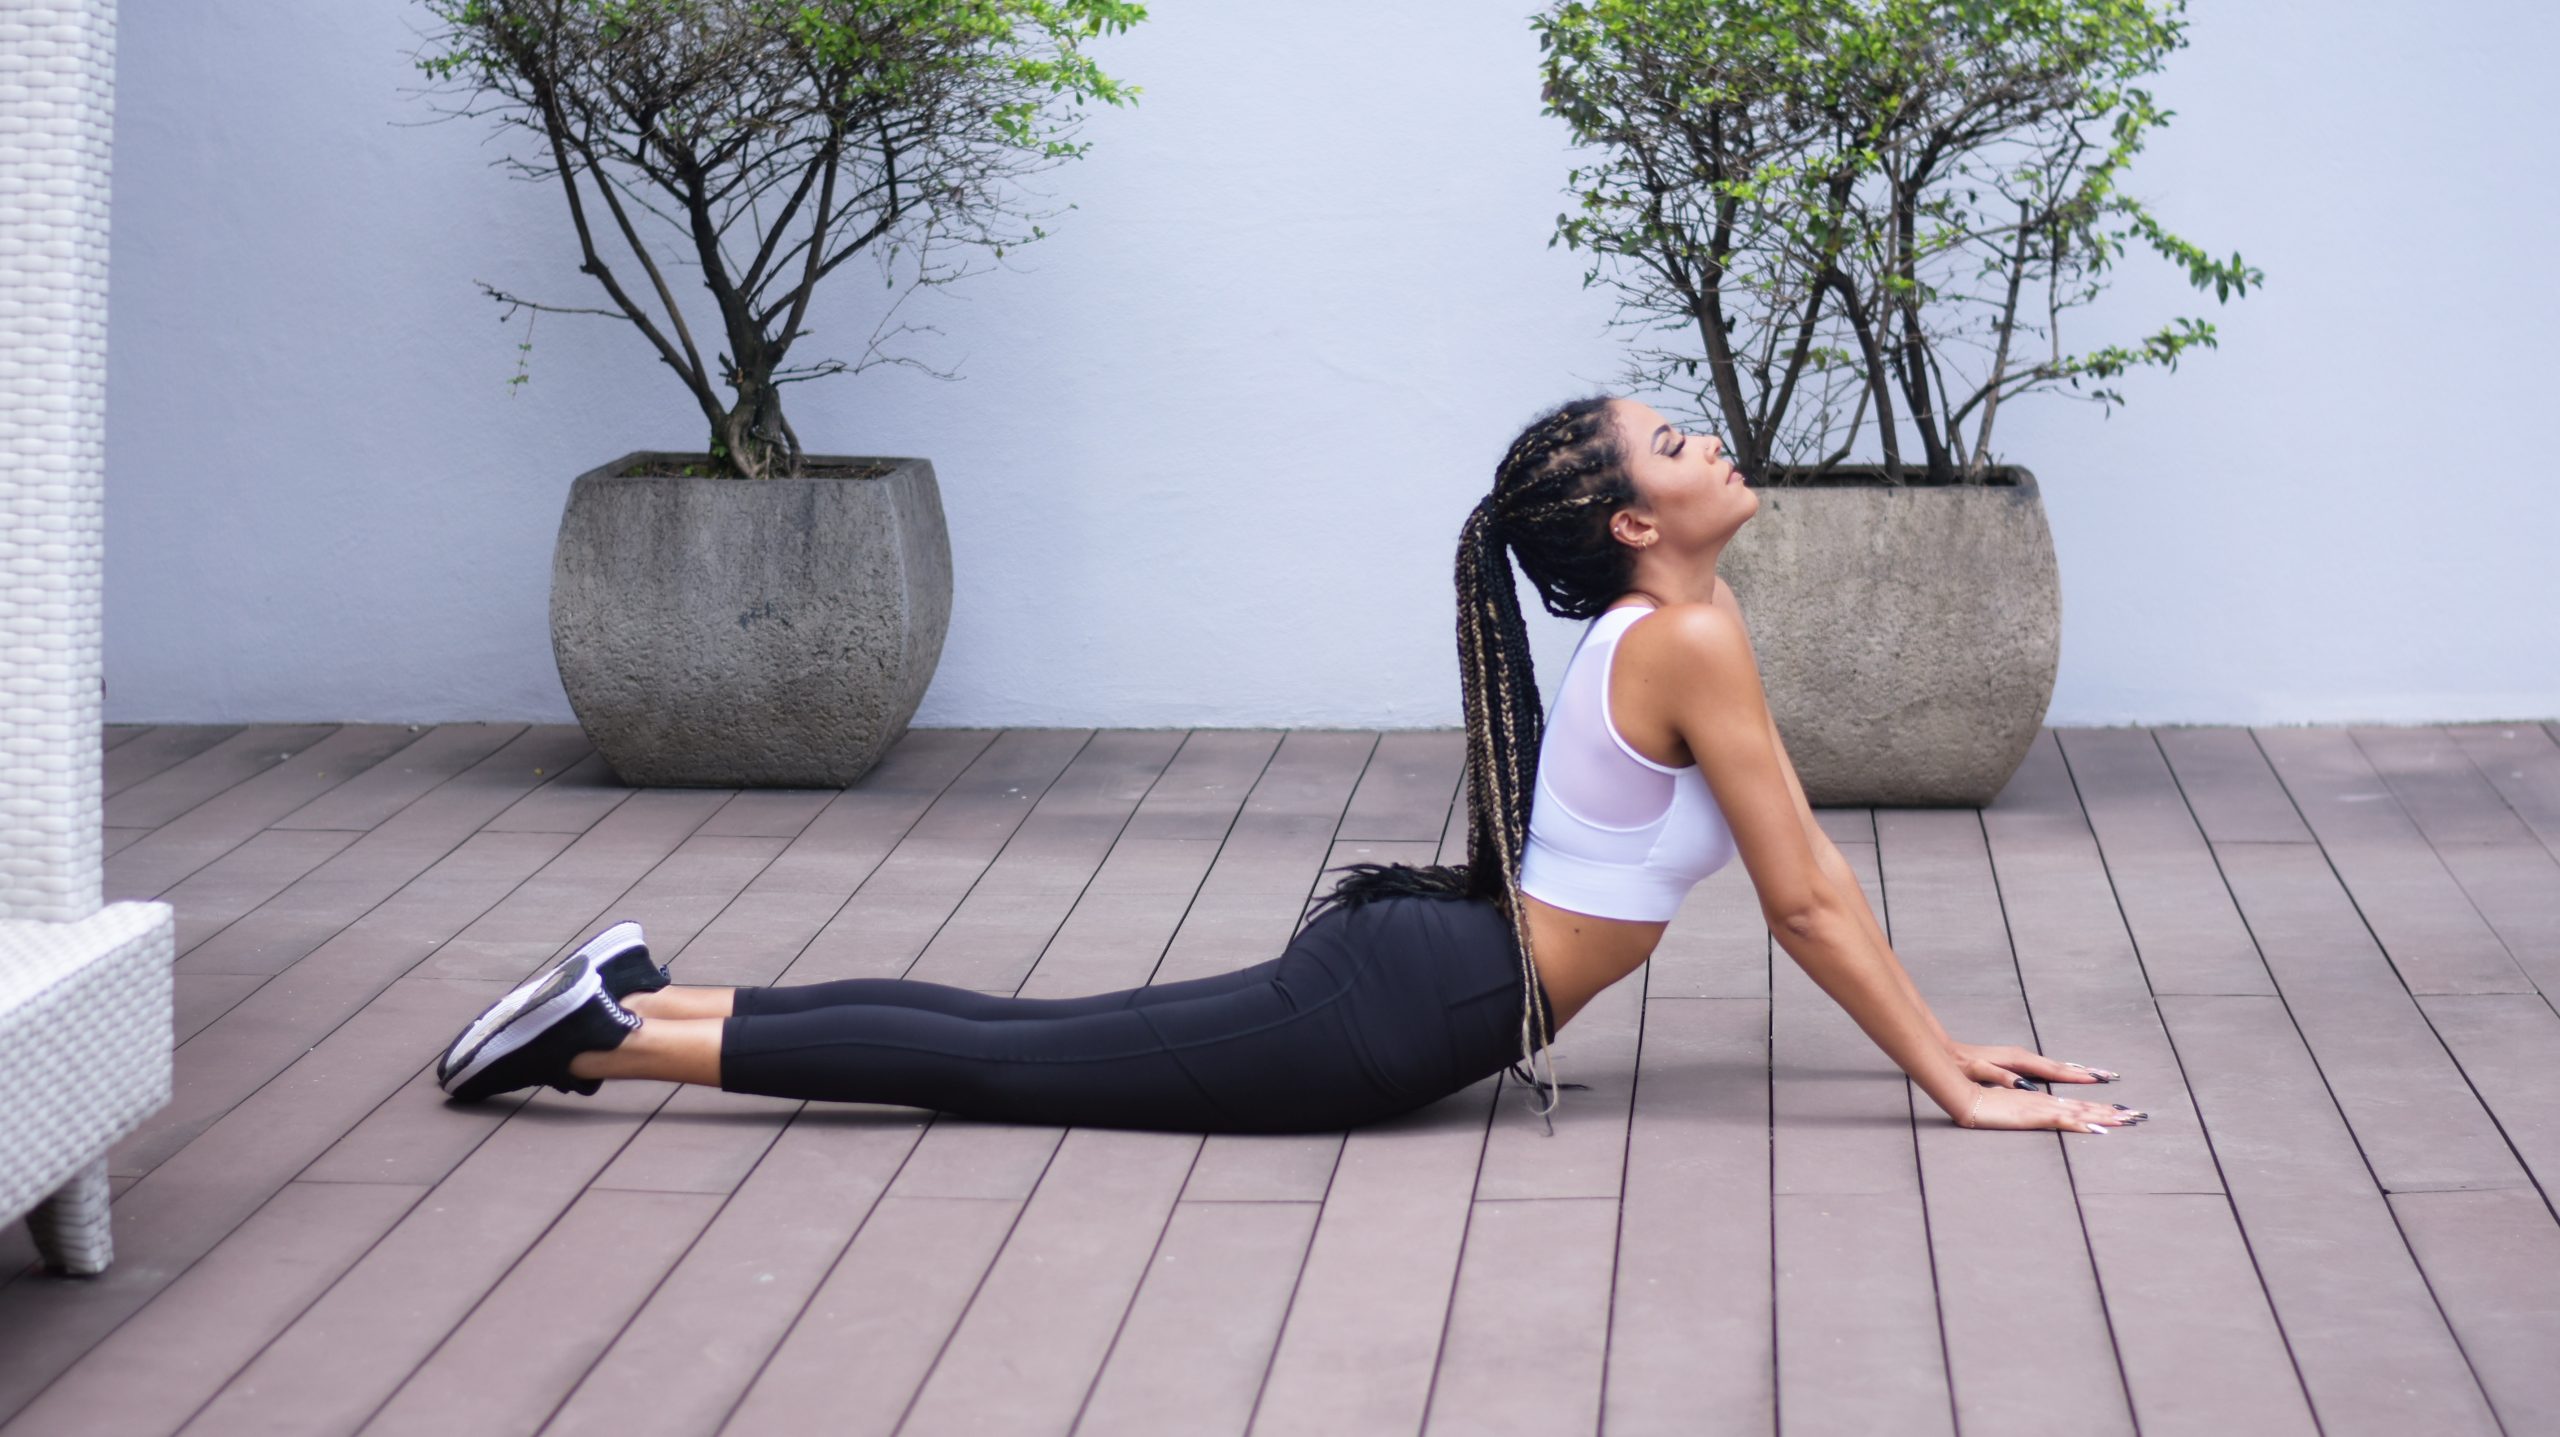 A toned woman stretching in a cobra pose on an outdoor bright wooden decking